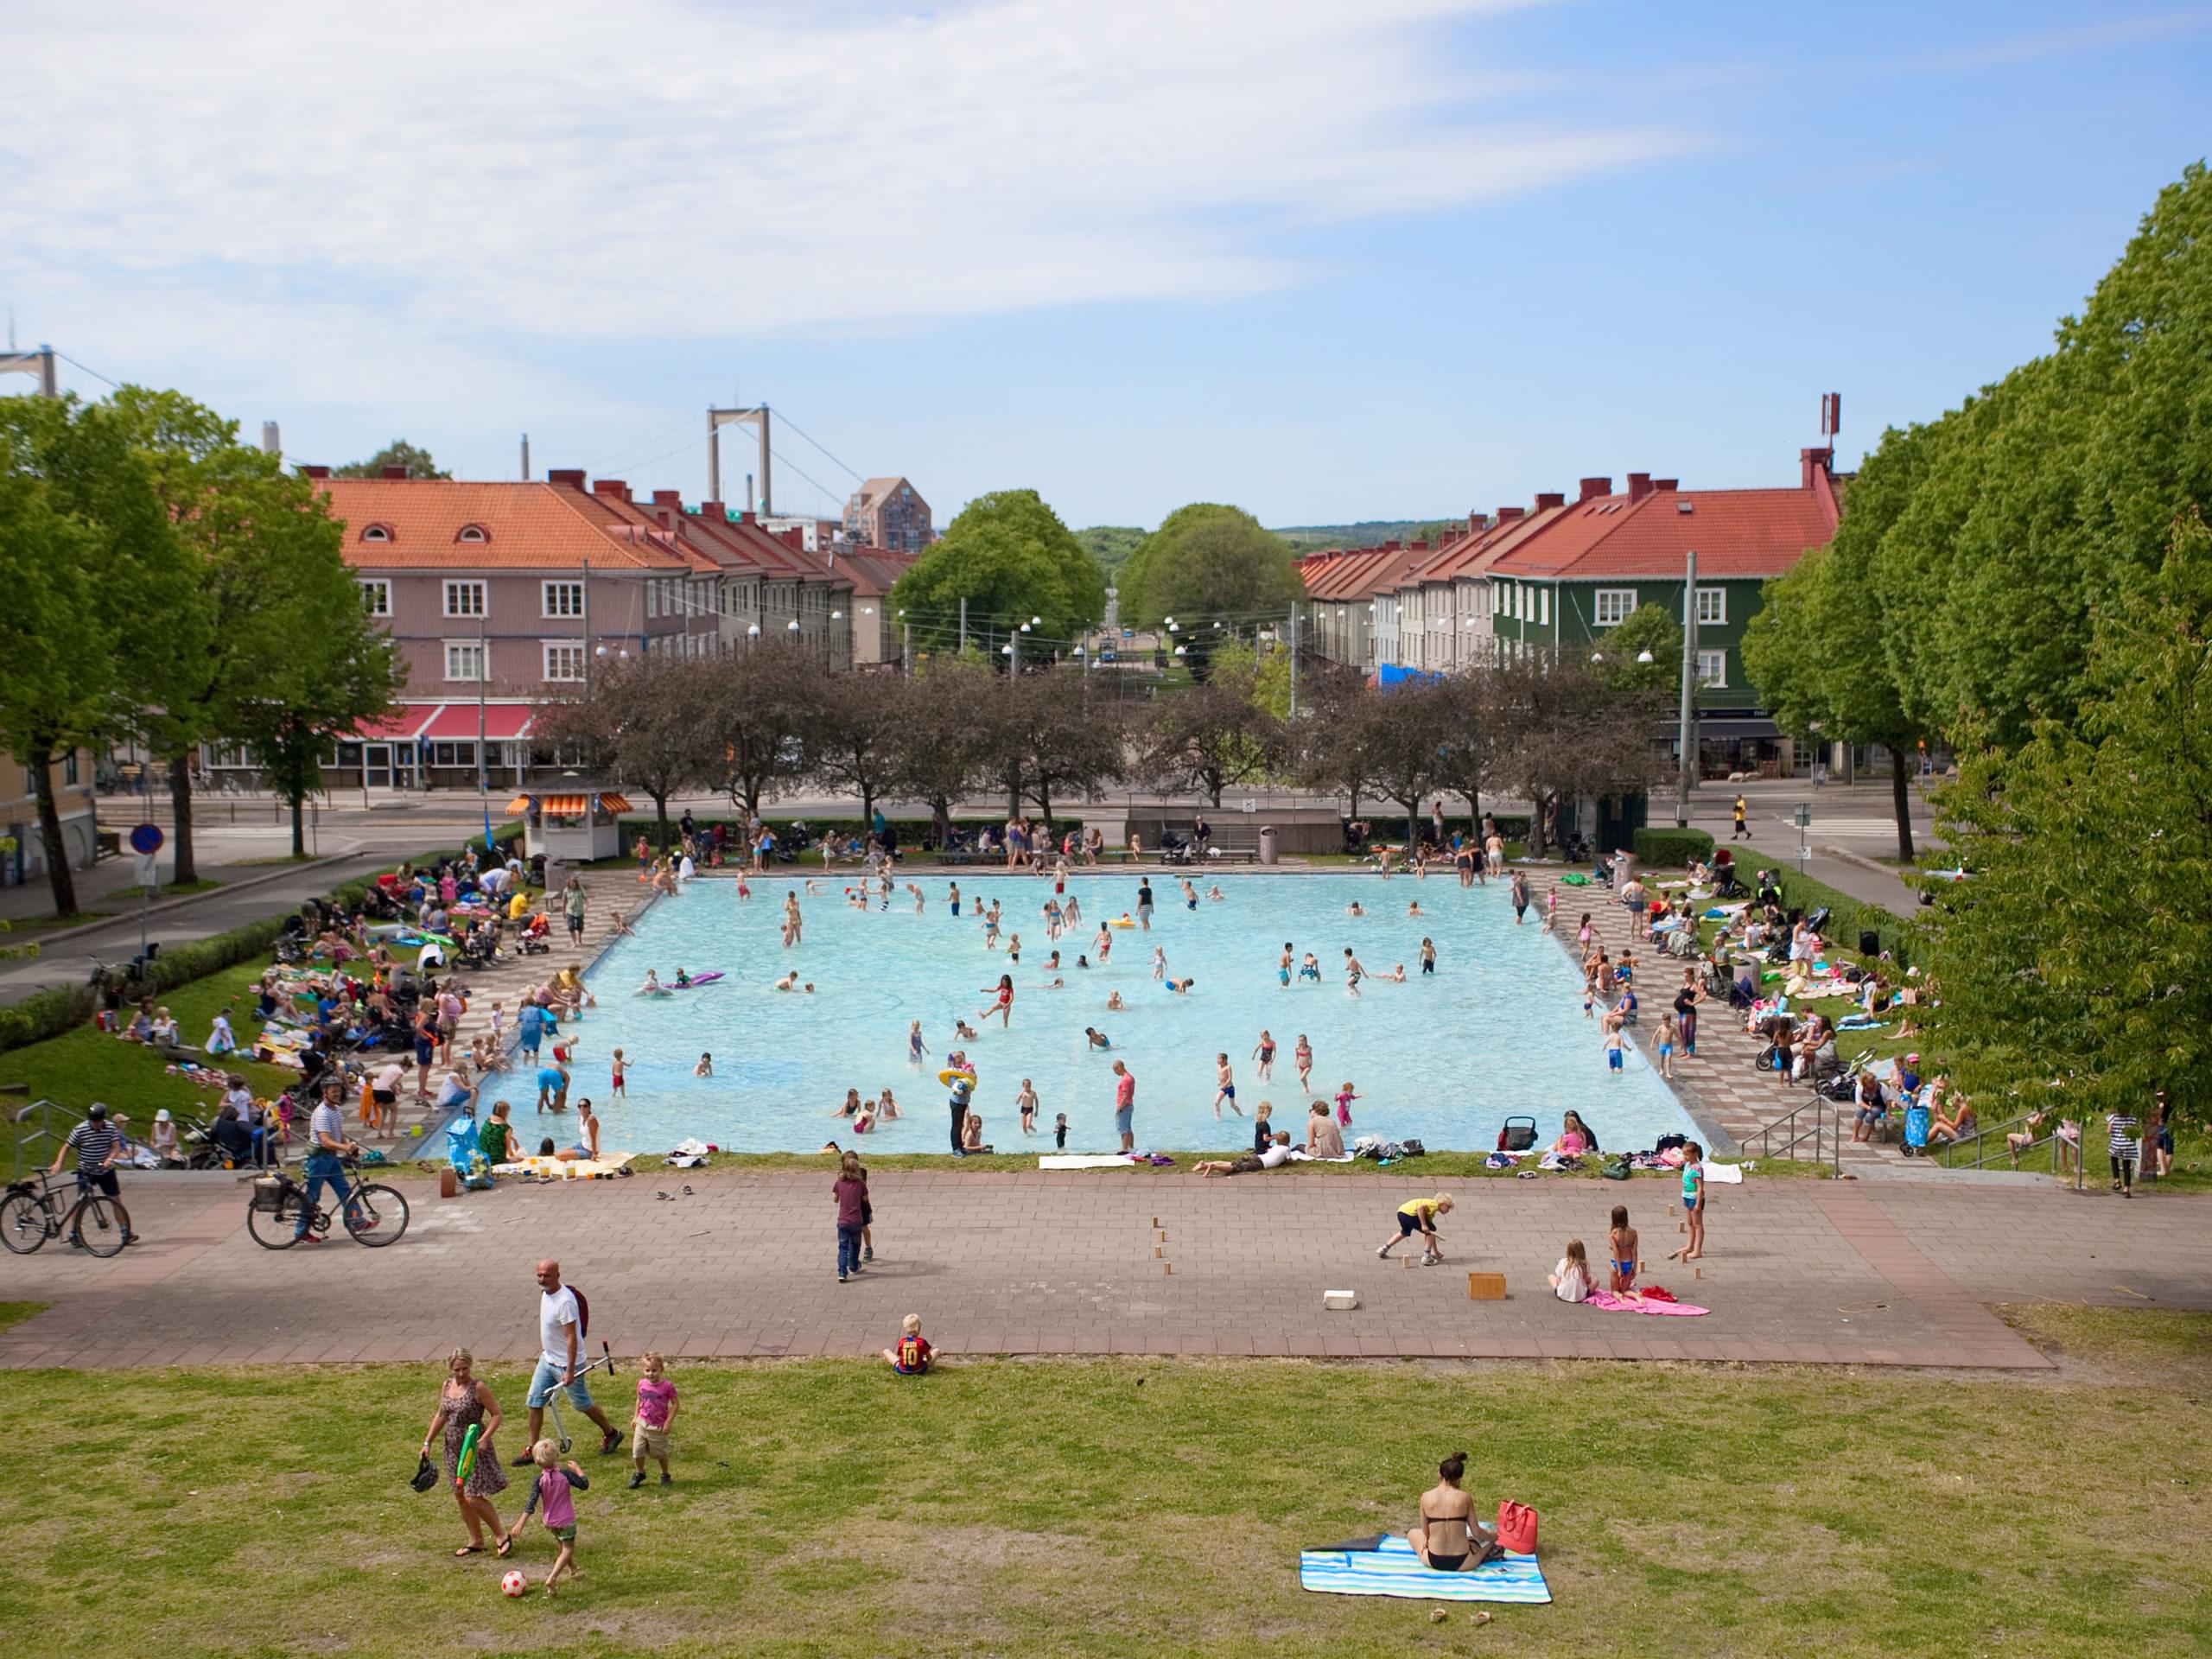 An overview of the community pool Plaskis in Majorna in Gothenburg.